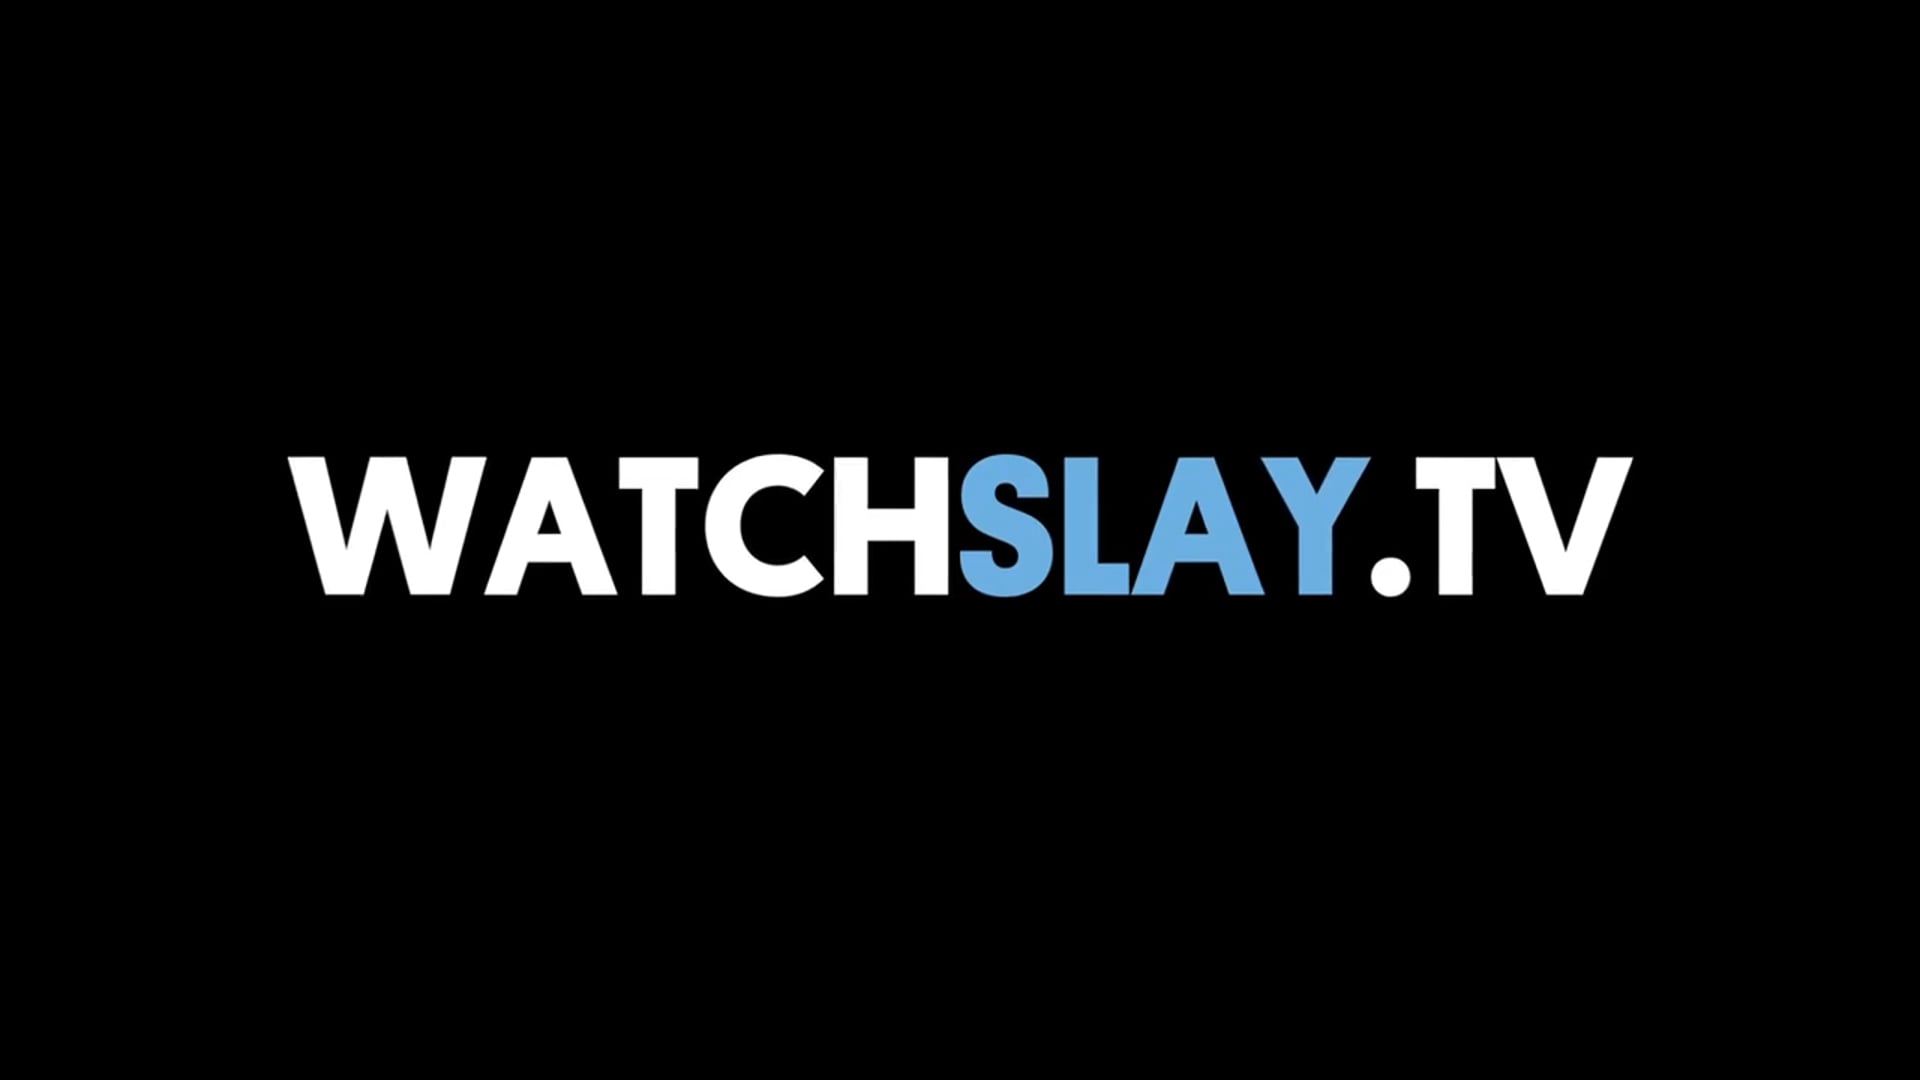 SLAY TV - Get In And WatchSlay.TV Now!